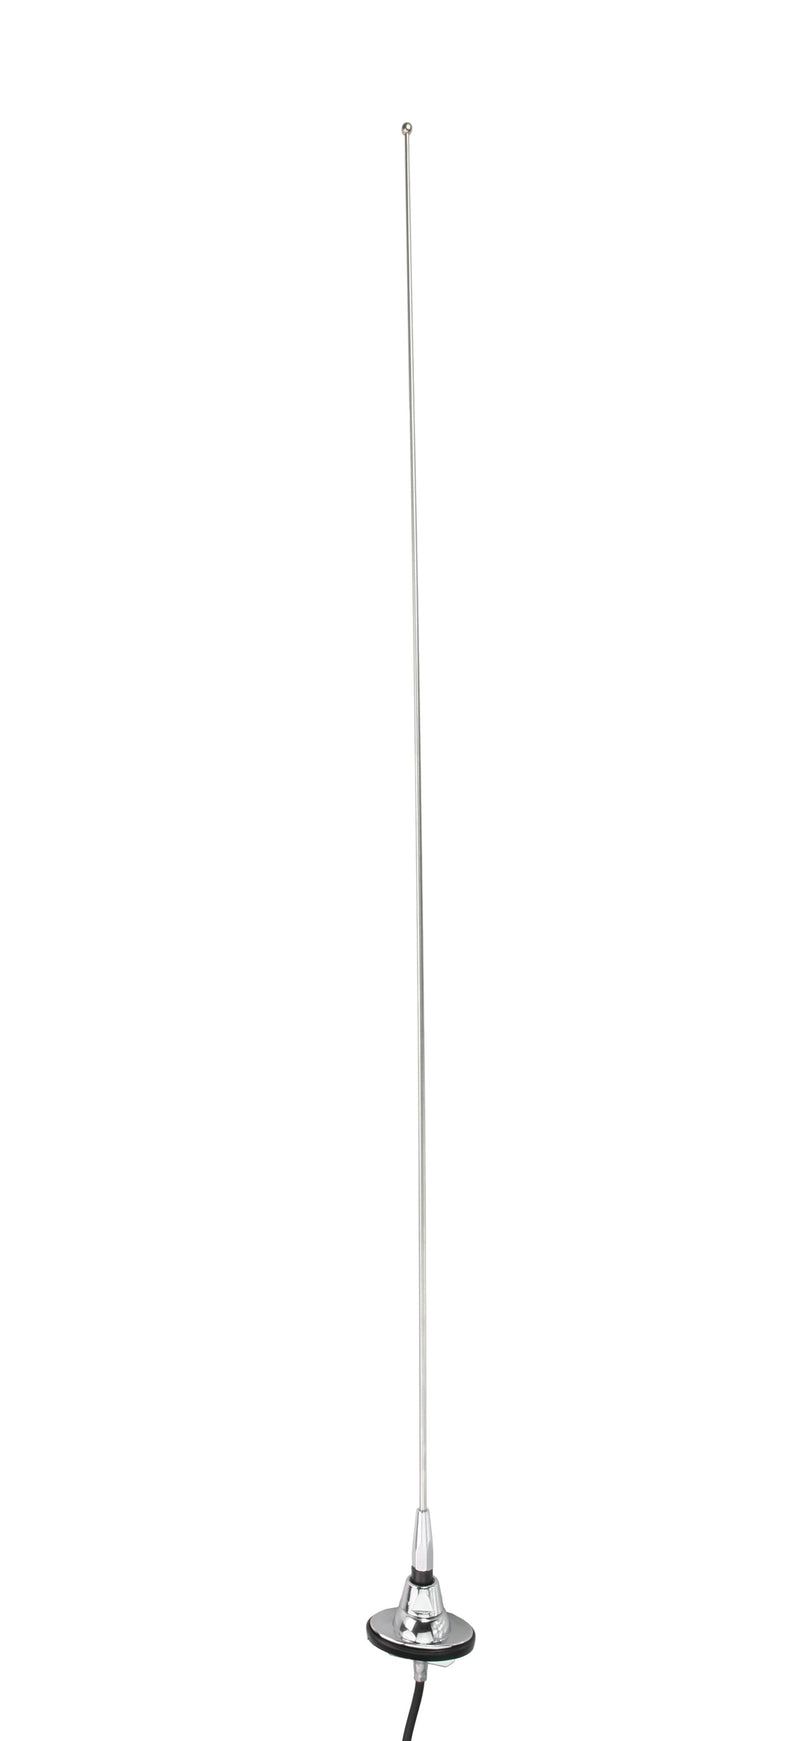 1984-90 Ford Bronco II Replacement Antenna